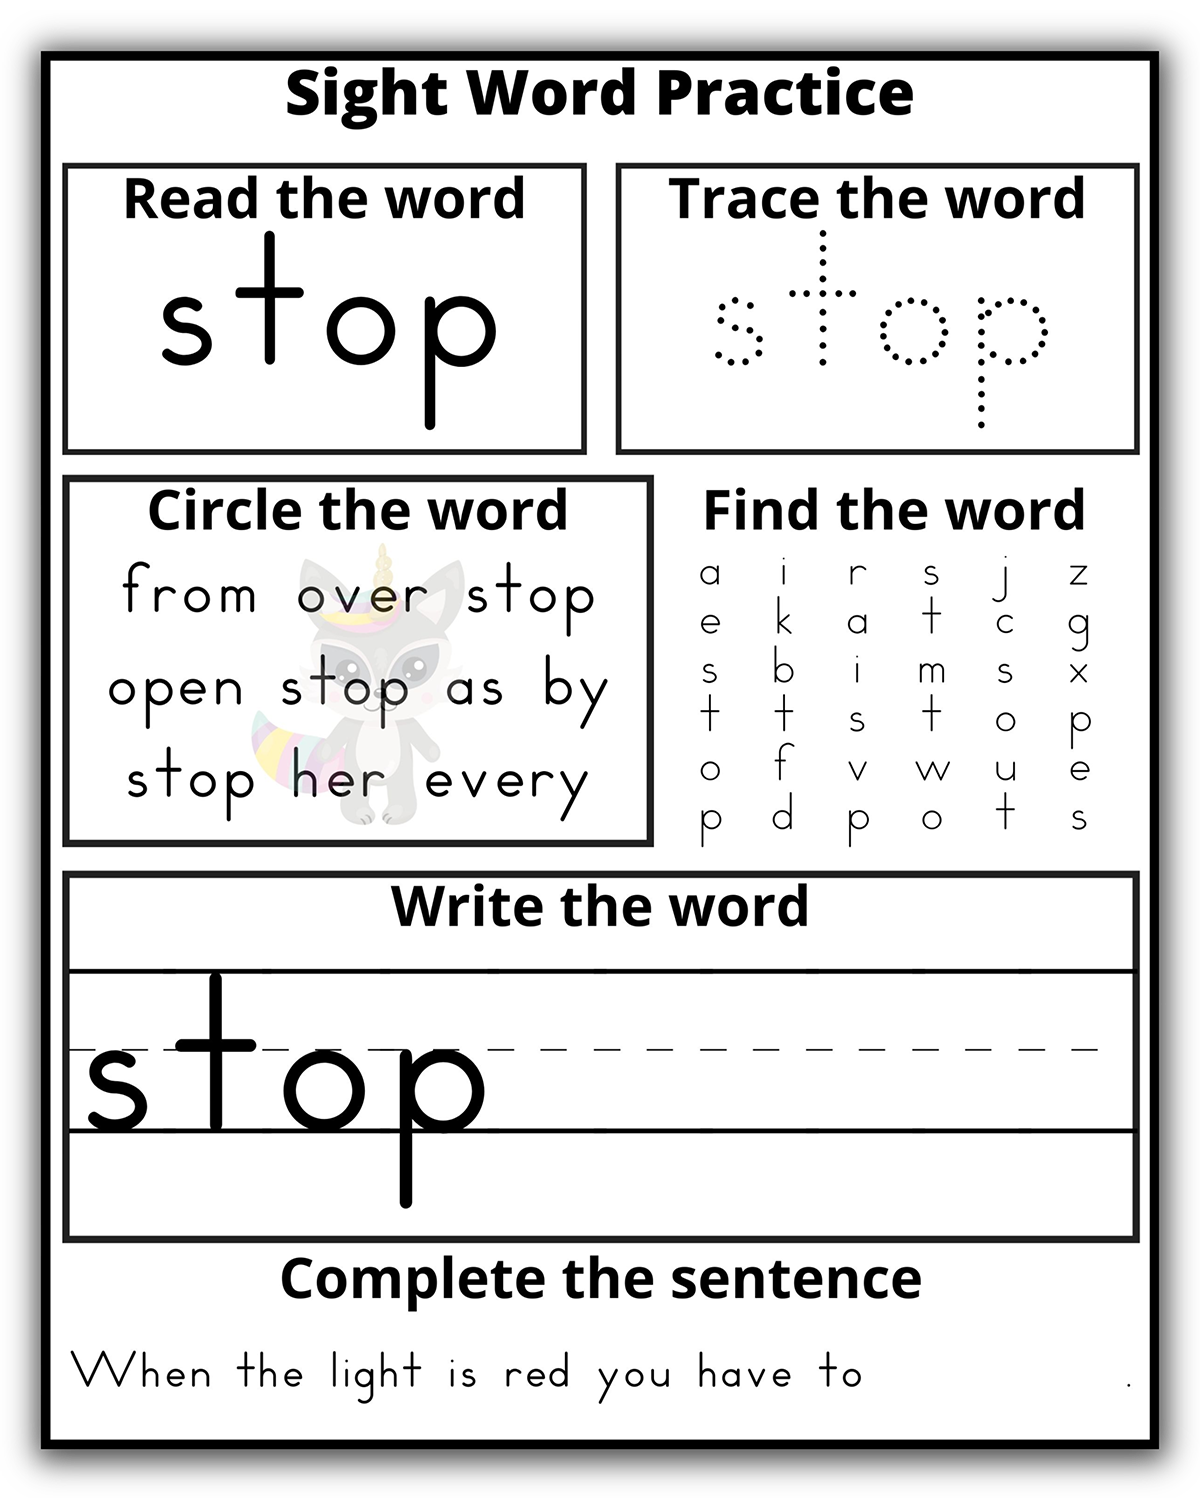 First Grade Sight Word Practice